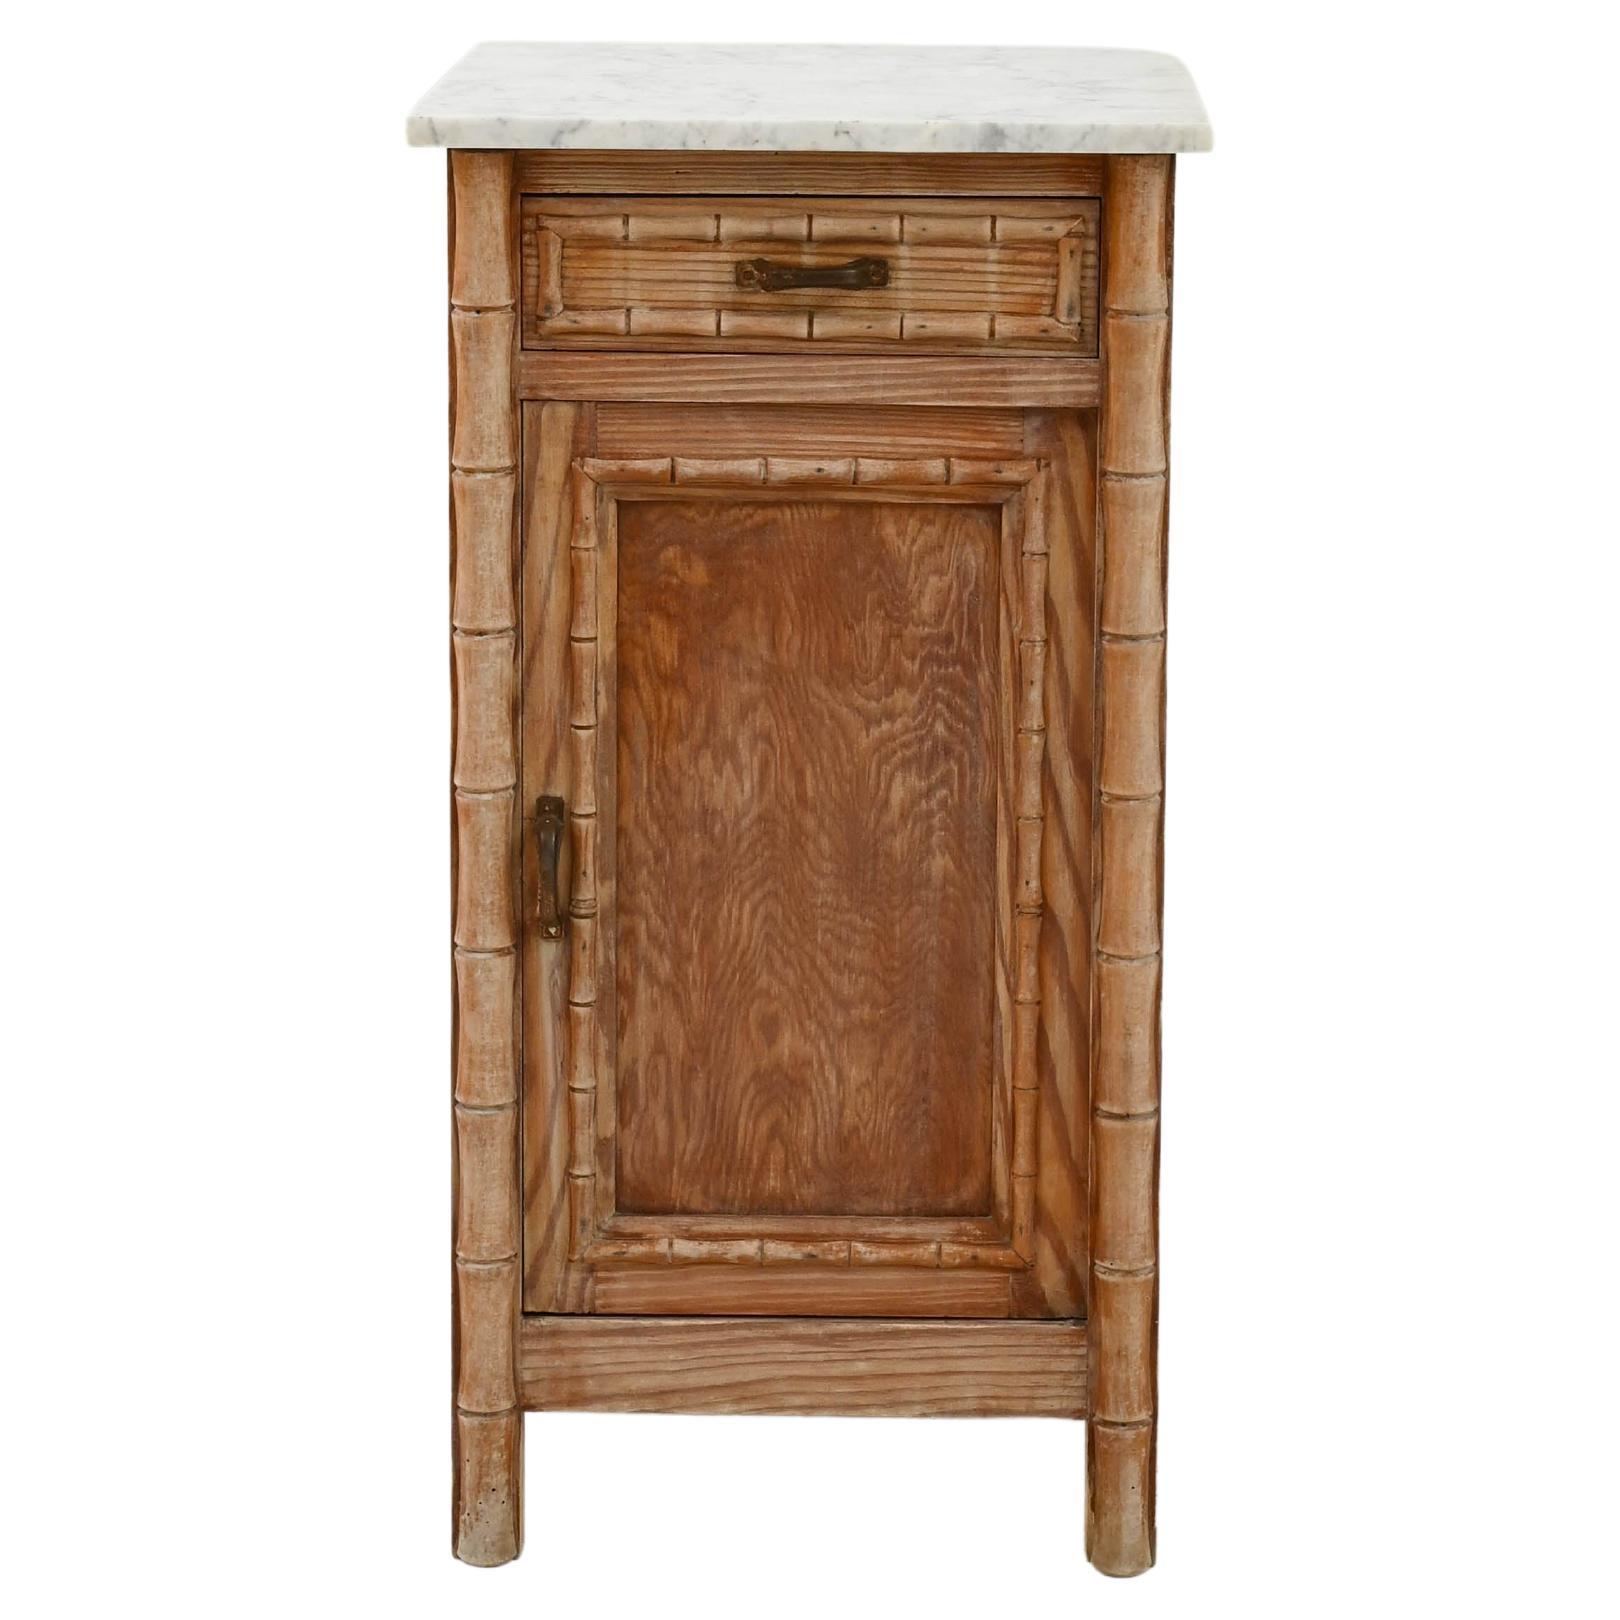 1900s French Wooden Bedside Table with Marble Top